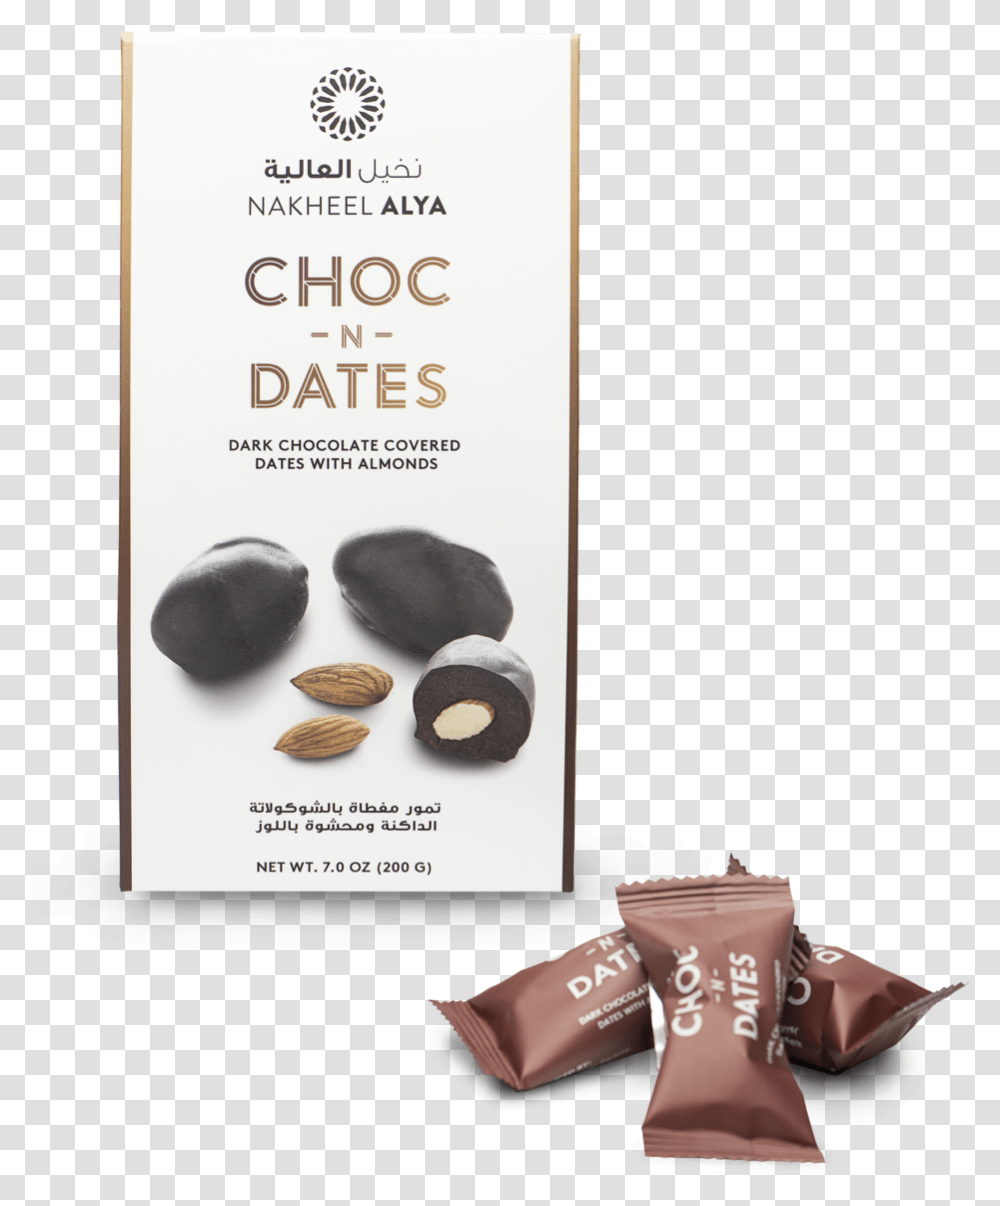 Dark Choc N Dates Chocolate, Coffee Cup, Plant, Bottle Transparent Png